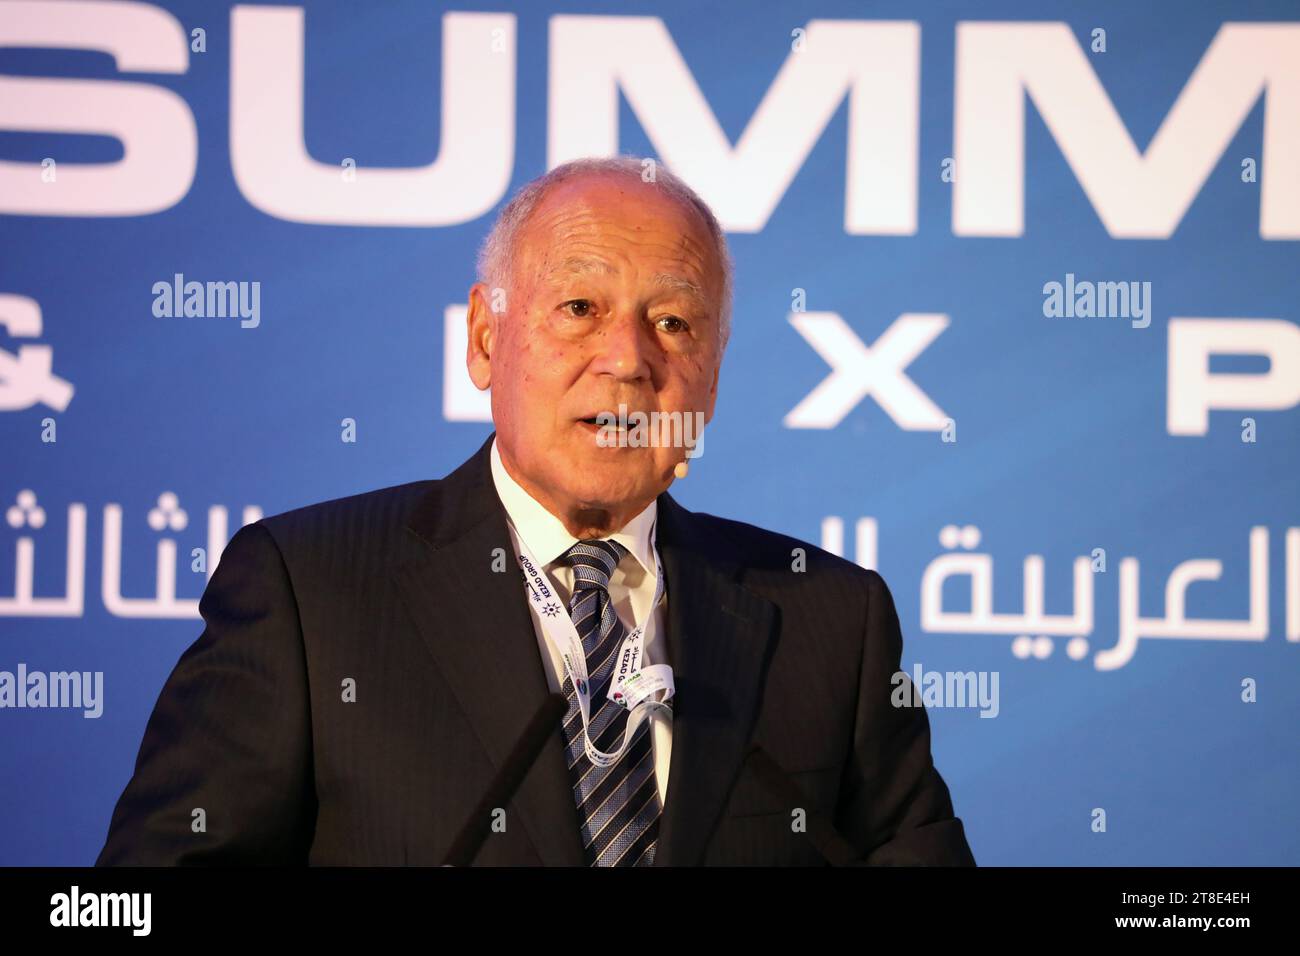 London, UK. 20 Nov 2023. Arab League Secretary General Ahmed Aboul Gheit tells Western countries to “wake up” to consequences of the Gaza war, at the Arab-British Economic Summit. Credit: Dominic Dudley/Alamy Live News Stock Photo